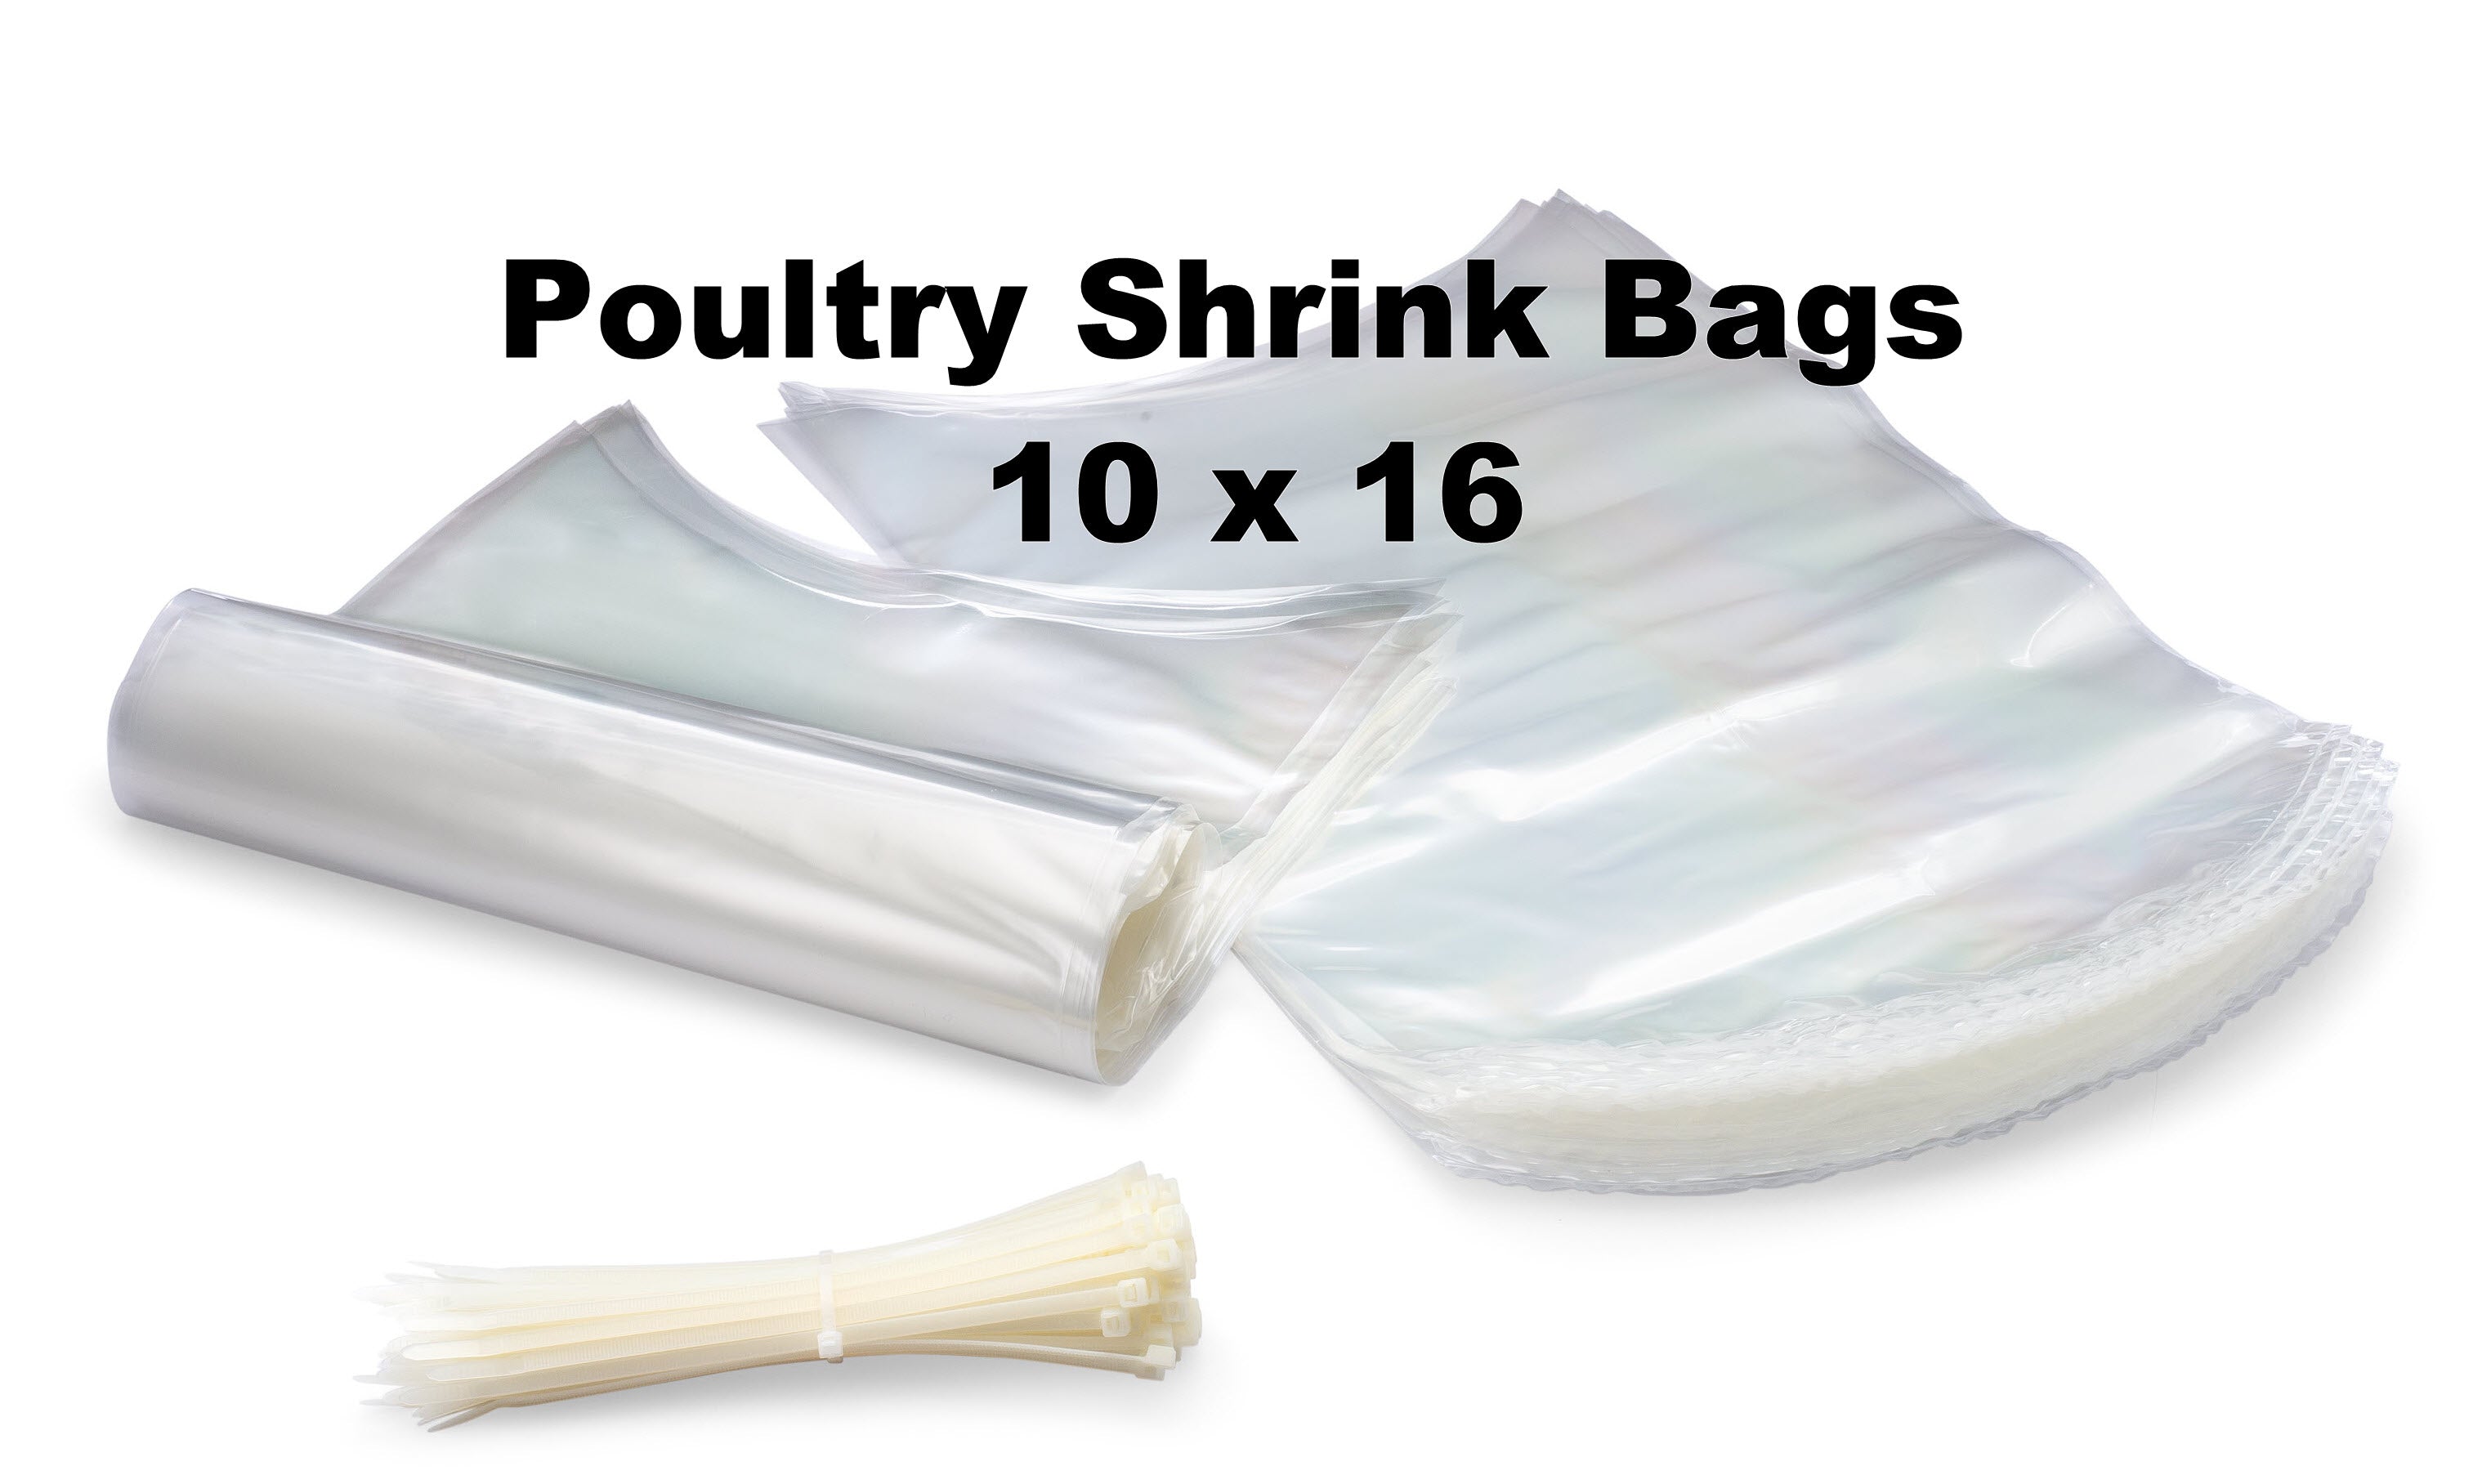 48 Pack of 10x16 Poultry Shrink Bags Chicken Freezer